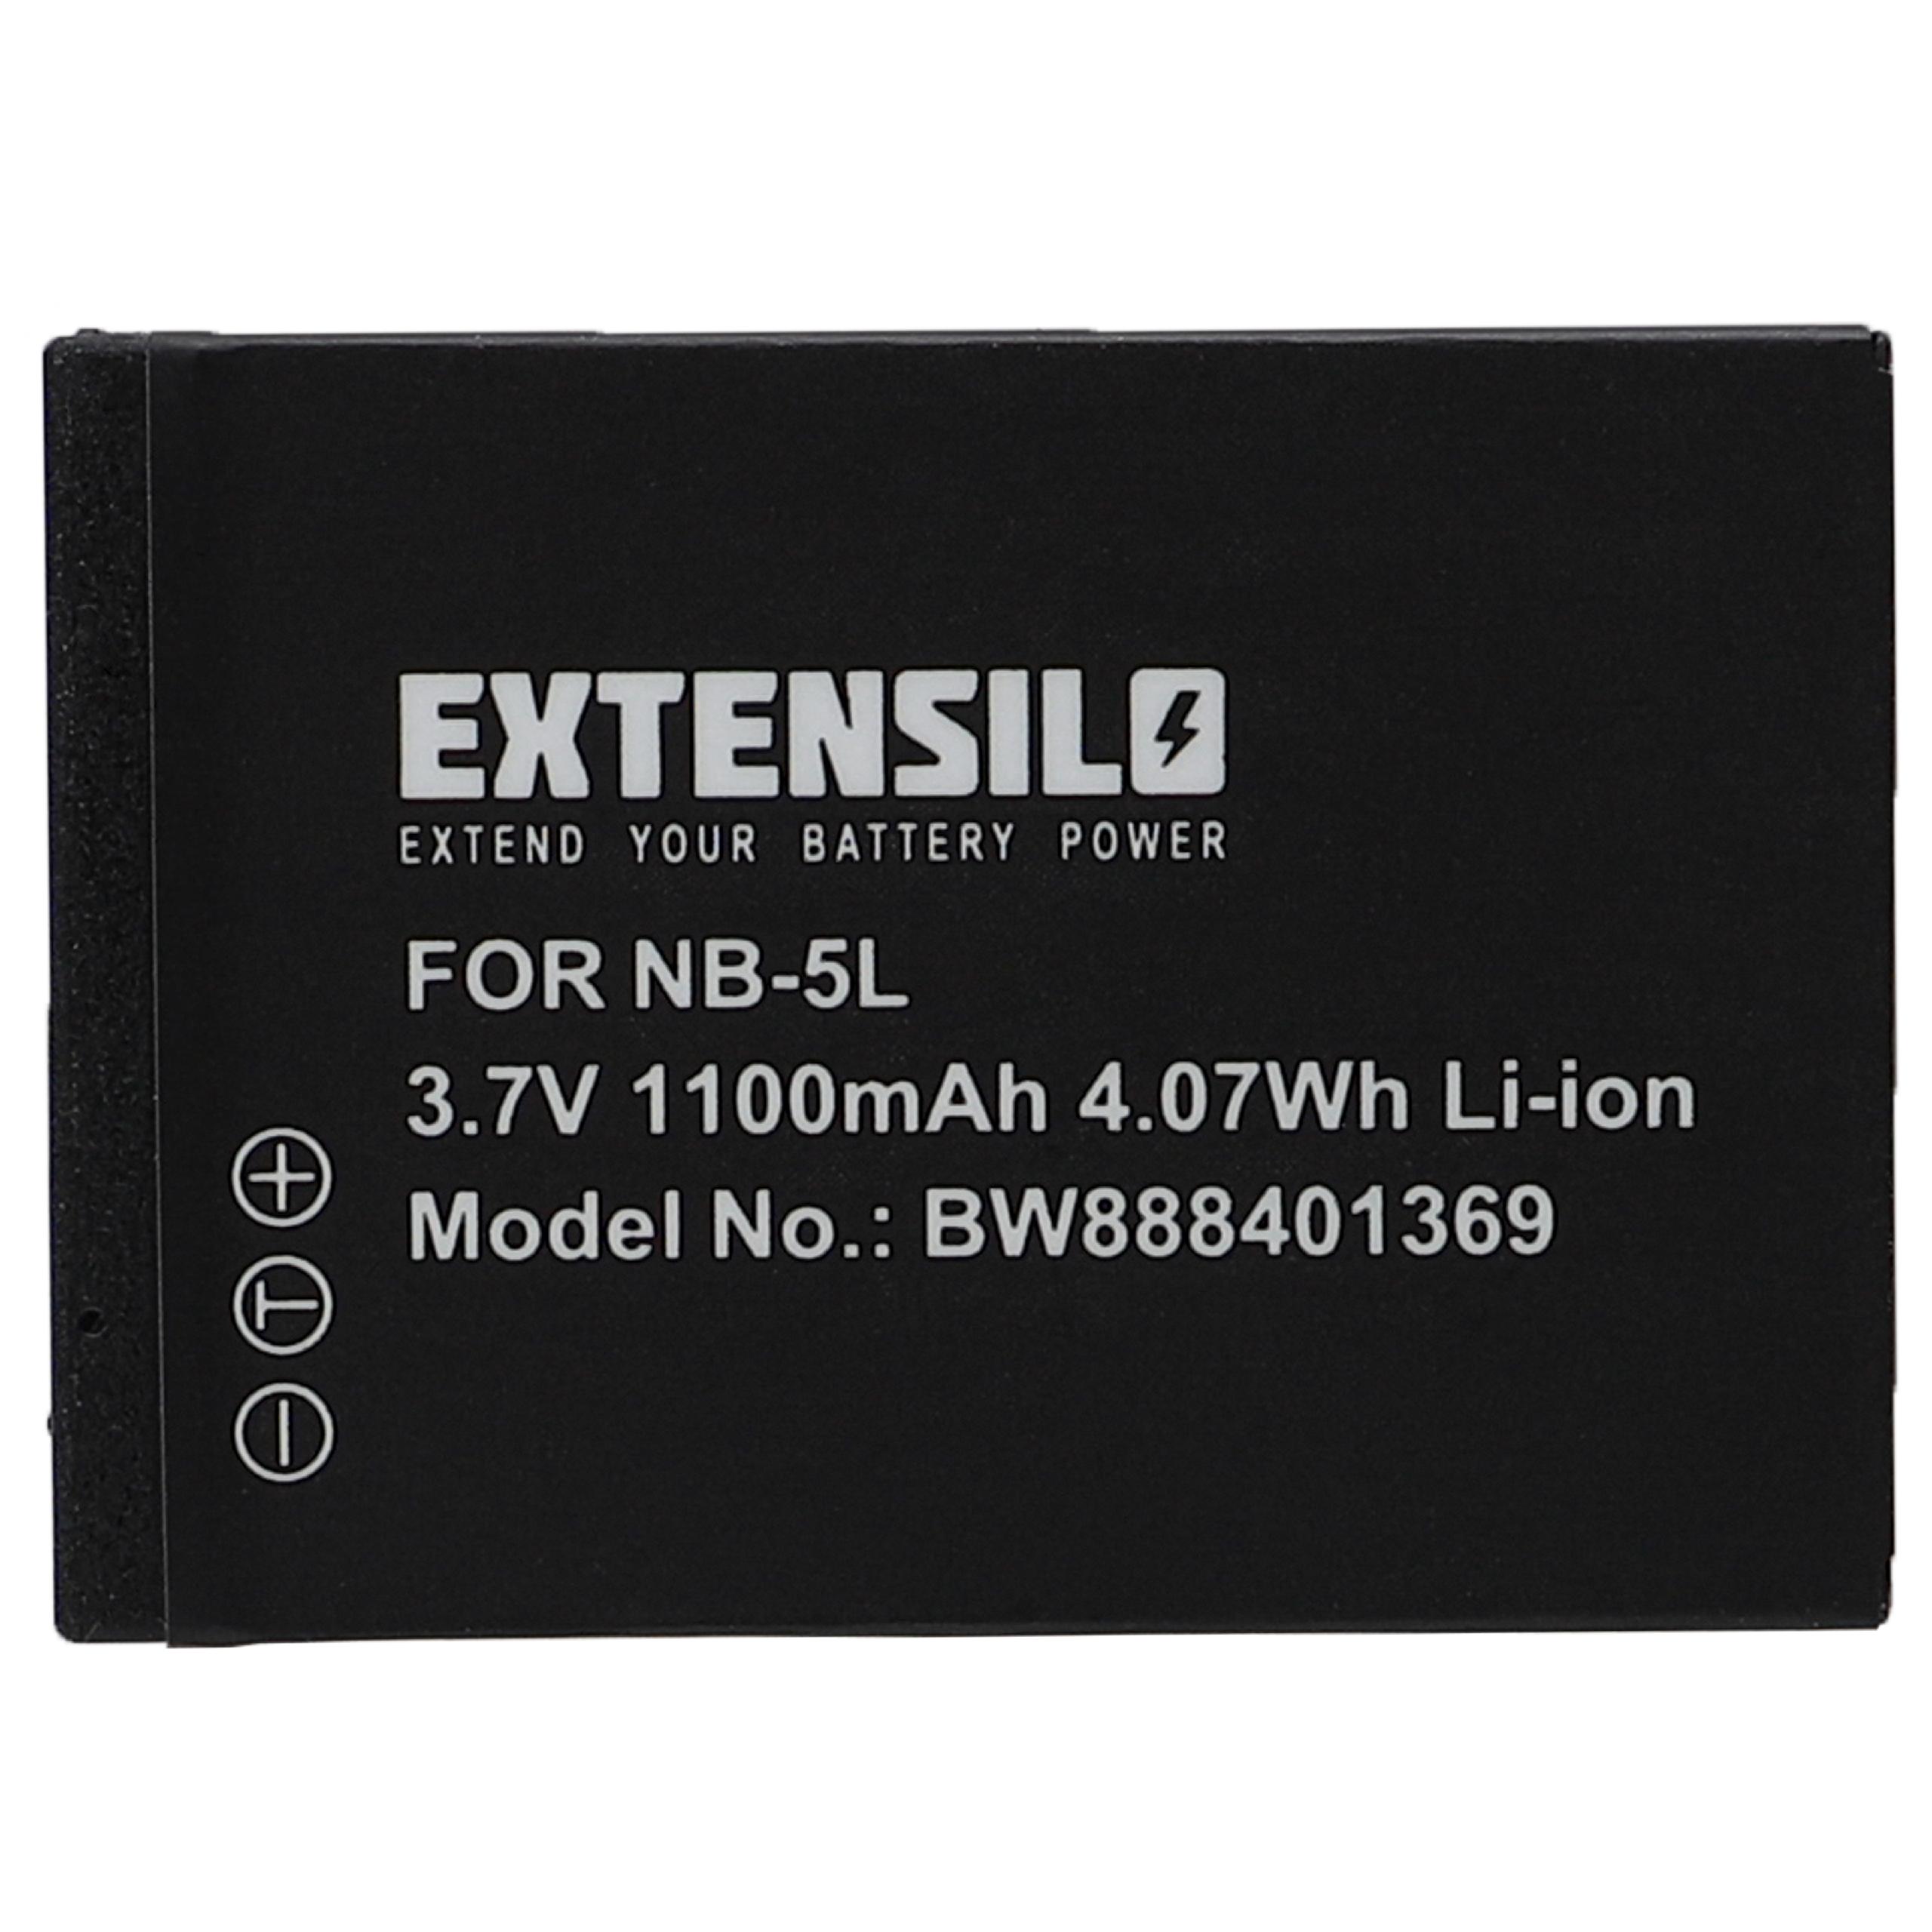 Battery Replacement for Canon NB-5L - 1100mAh, 3.7V, Li-Ion